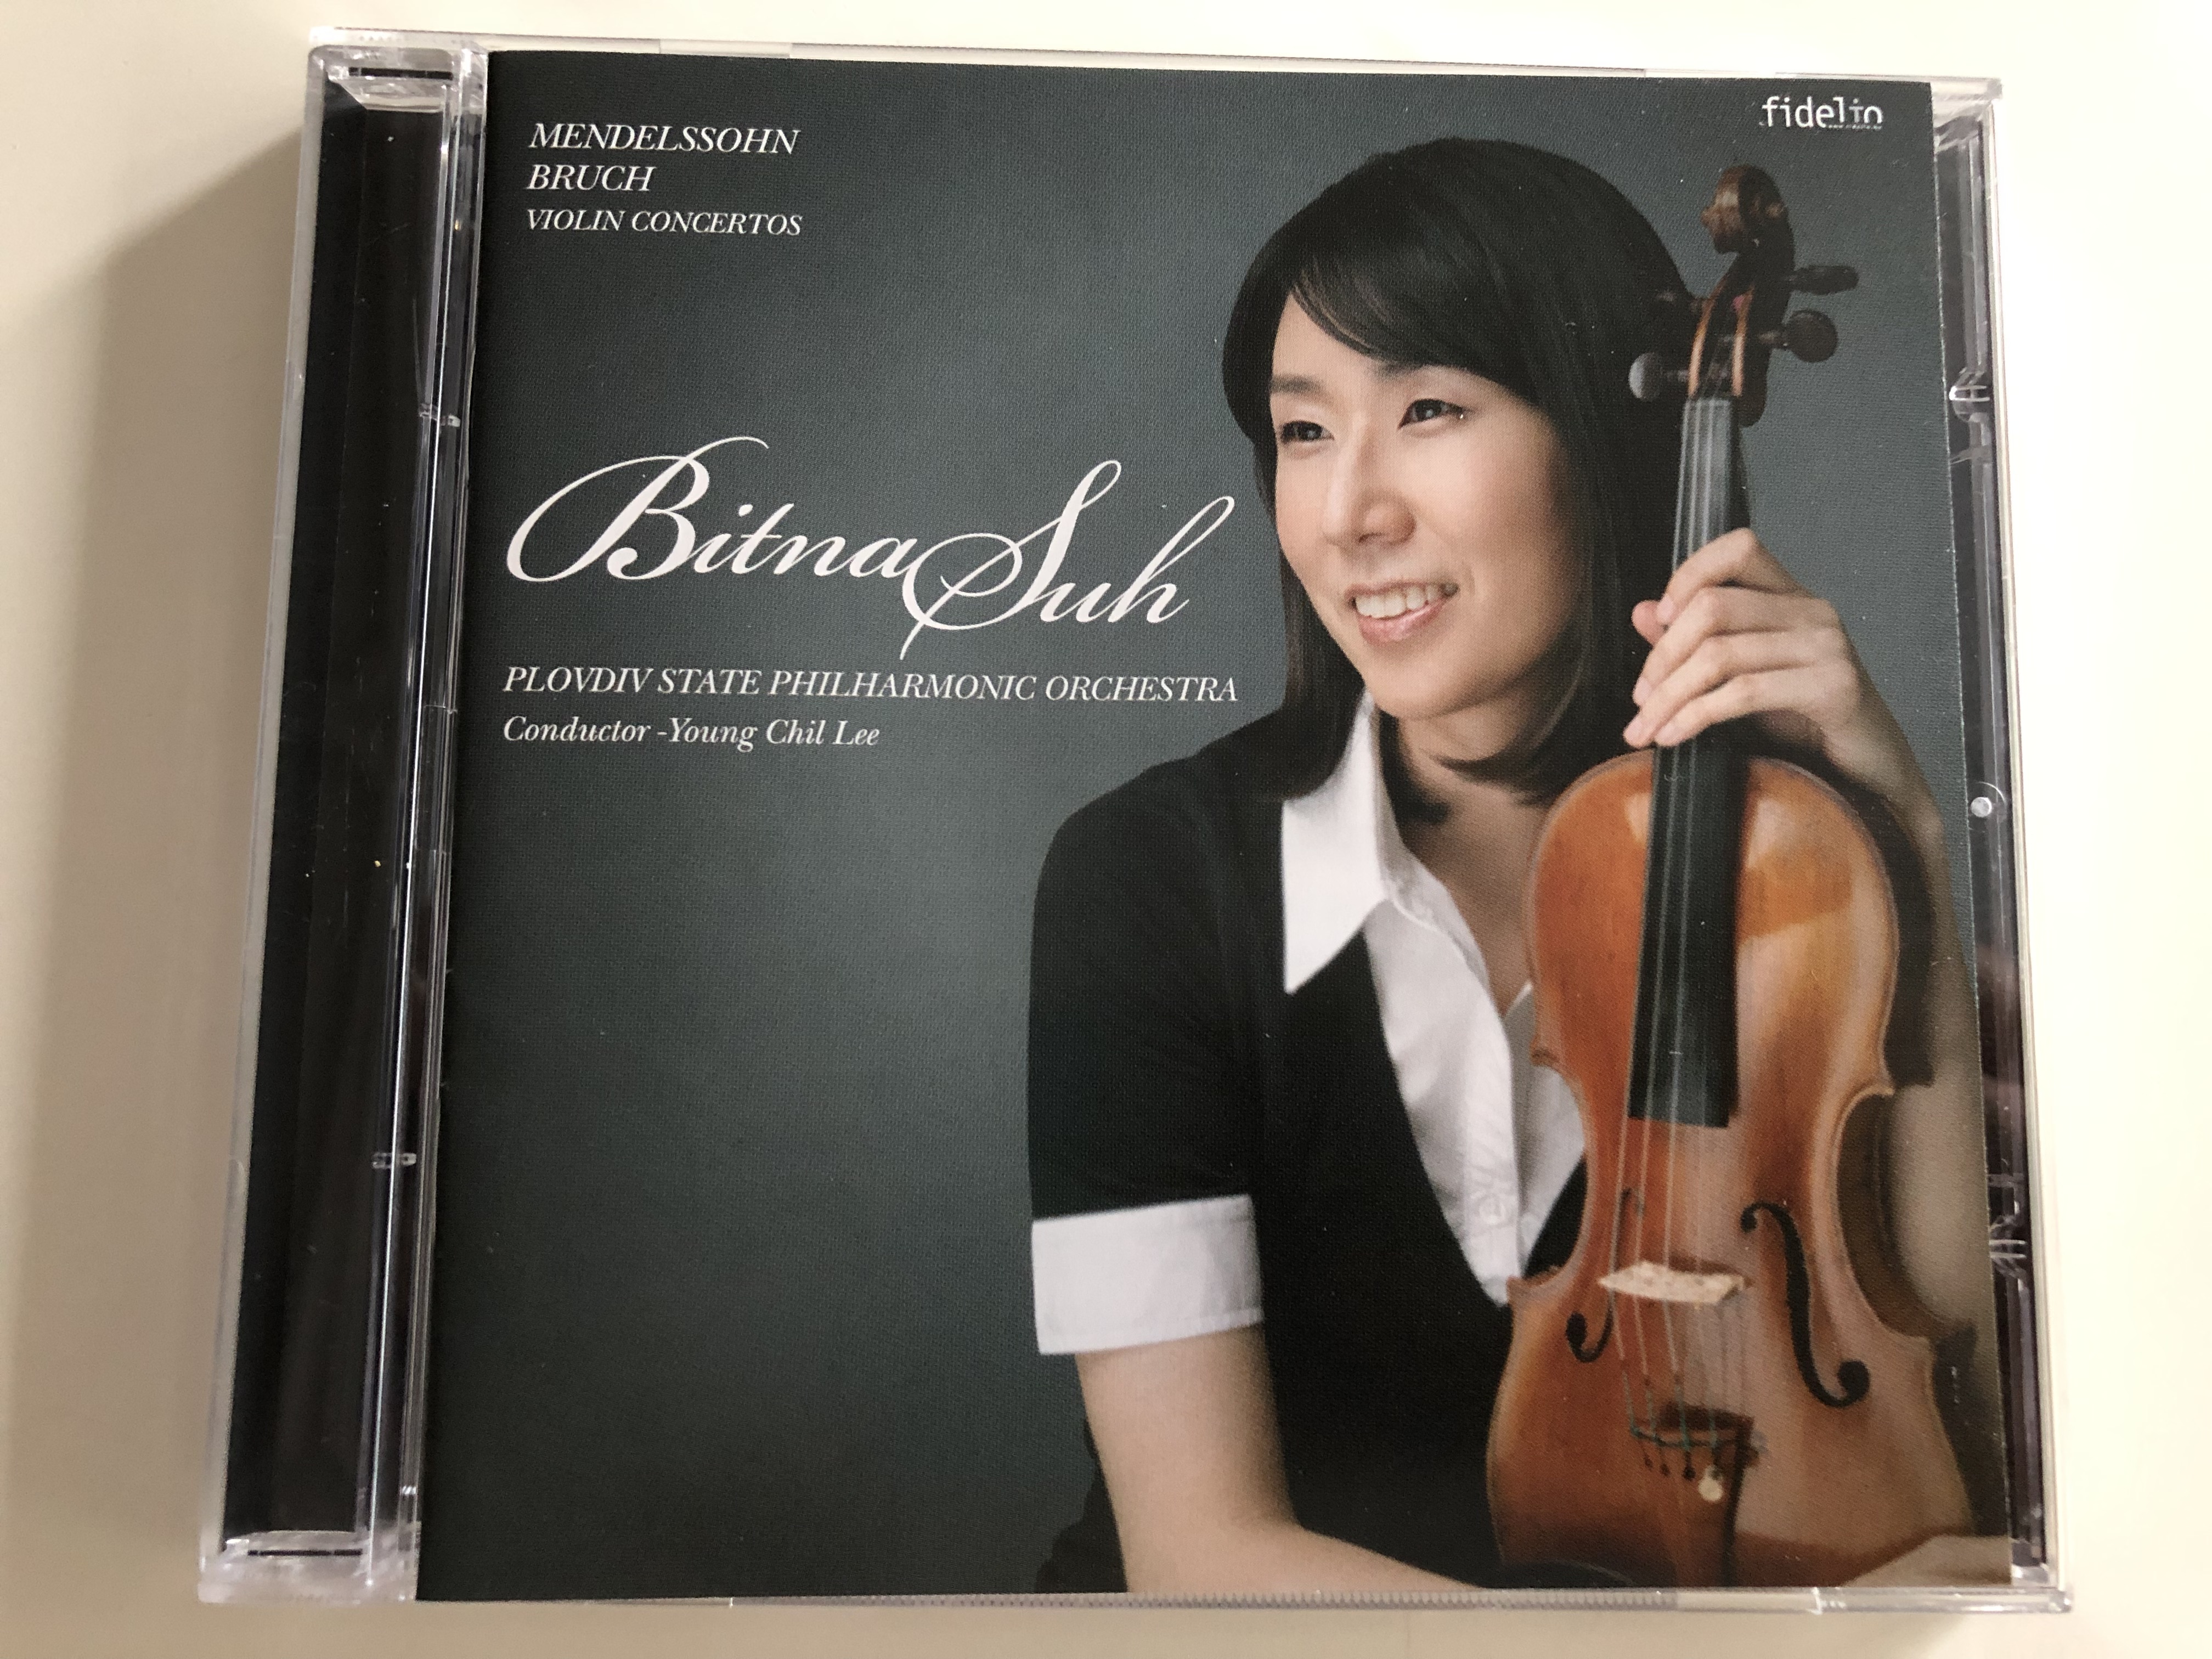 bitna-suh-mendelssohn-bruch-violin-concertos-plovdiv-state-philharmonic-orchestra-conducted-by-young-chil-lee-audio-cd-2009-fid-cd-102-1-.jpg